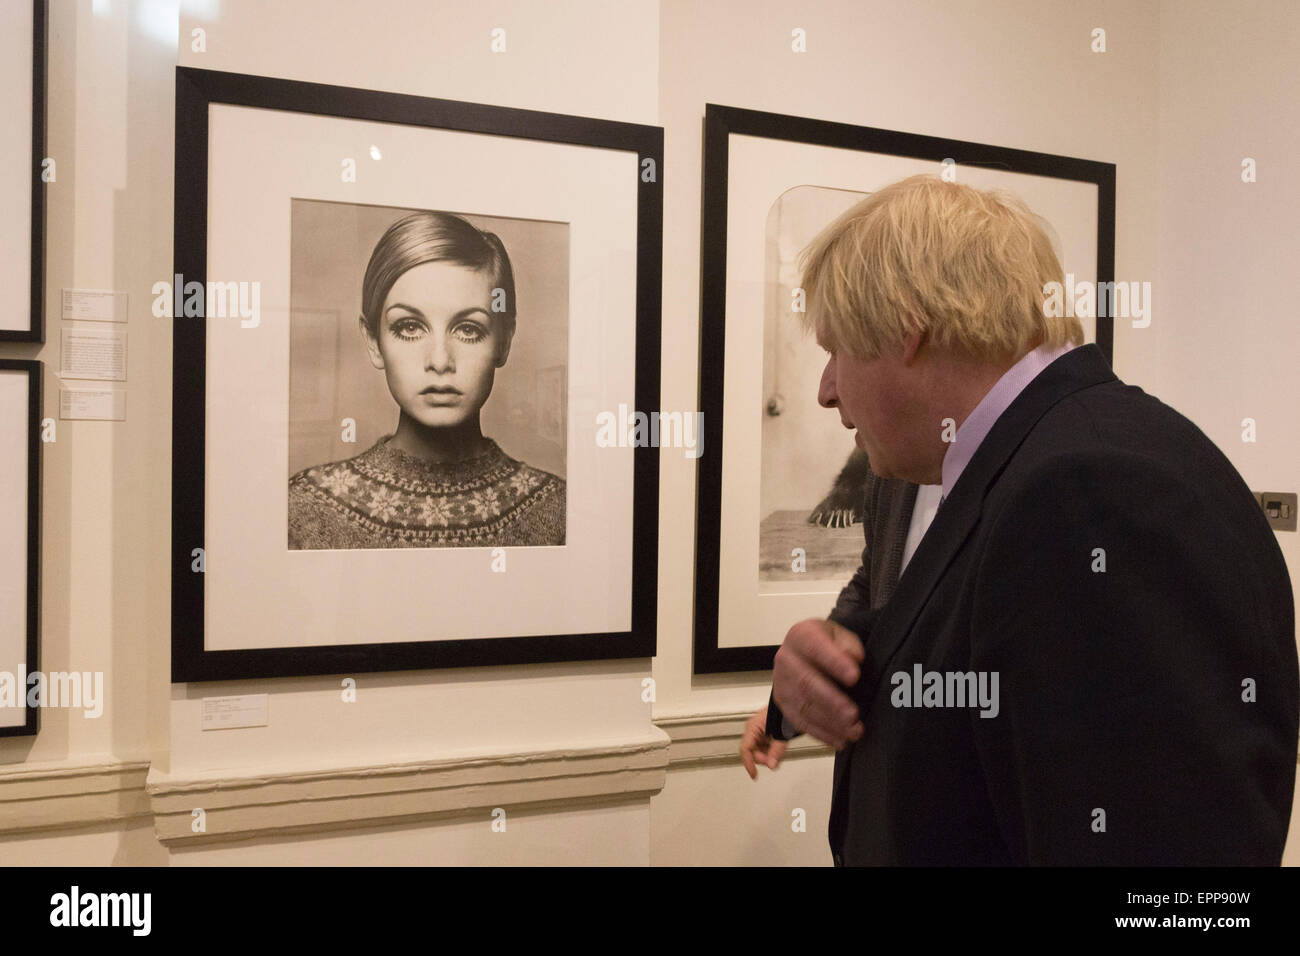 London, UK. 20 May 2015. Boris Johnson looks at a photo of Twiggy. The Mayor or London Boris Johnson formally opens the Photo London art fair at Somerset House. The fair is open to the public from 21 to 24 May 2015. Hailed as the largest and most important new photography fair ever staged in London. It brings together over 70 galleries and offers talks, screenings and performances. Photo: Bettina Strenske Stock Photo